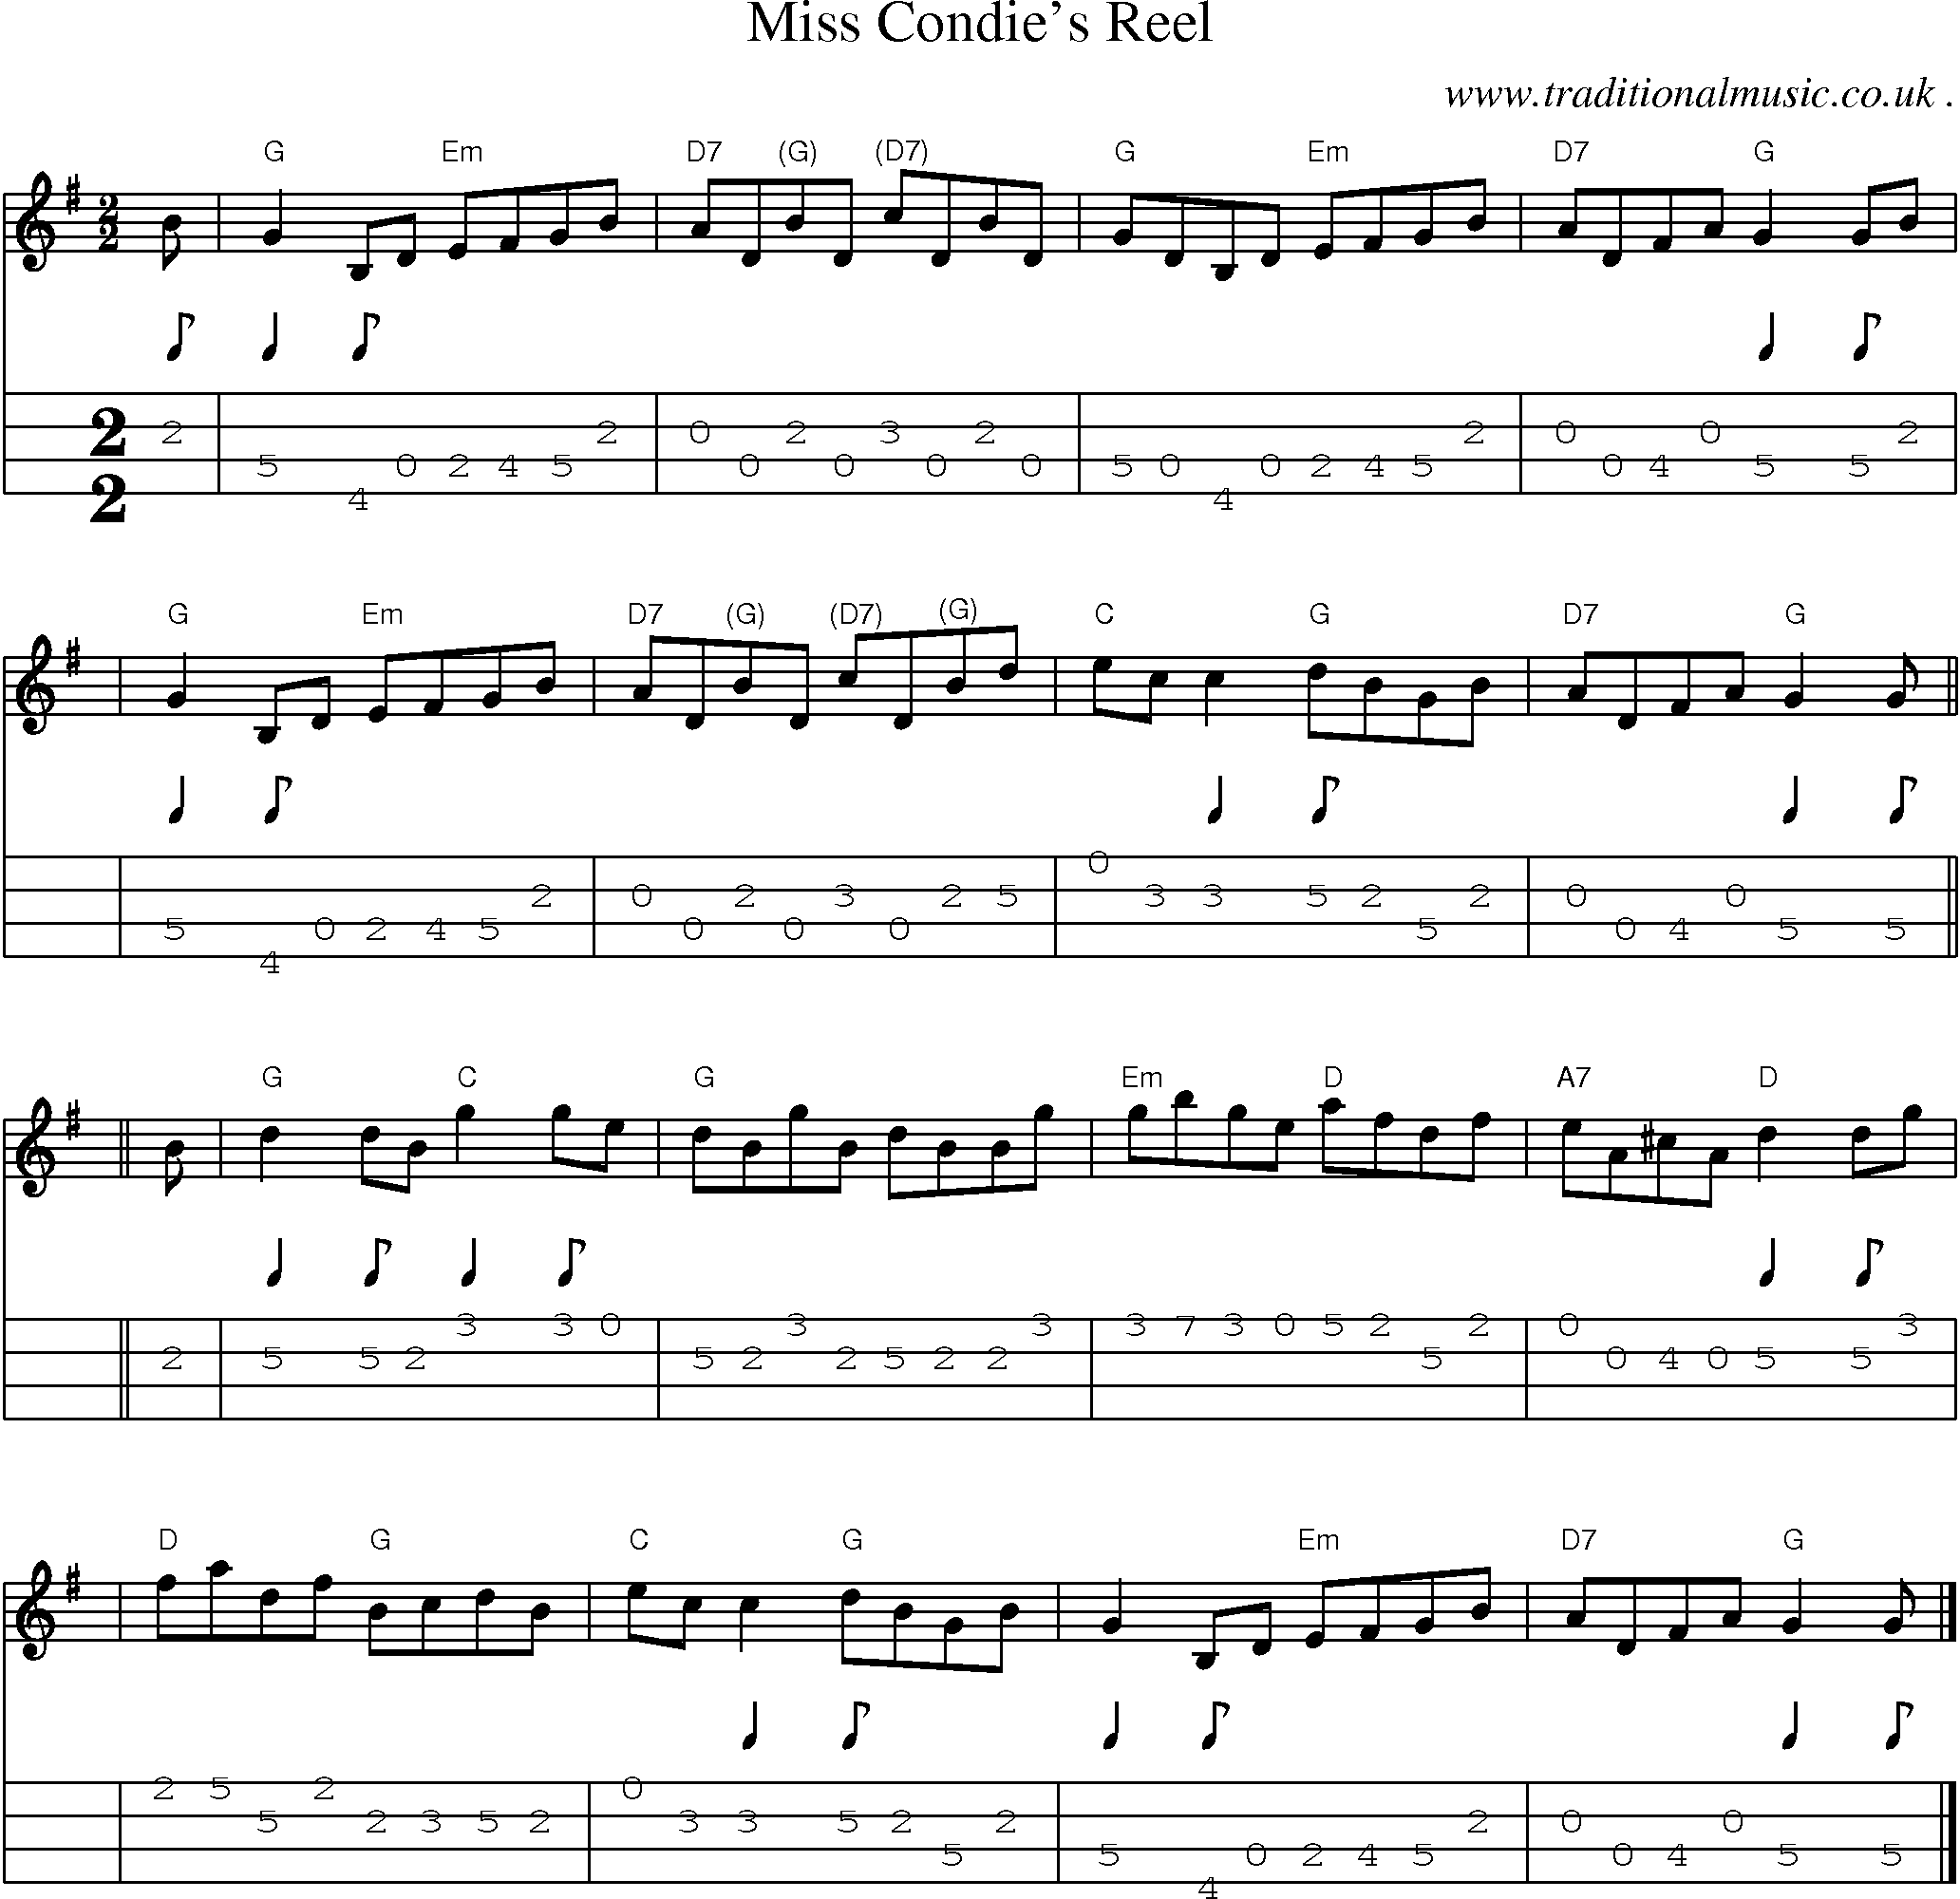 Sheet-music  score, Chords and Mandolin Tabs for Miss Condies Reel